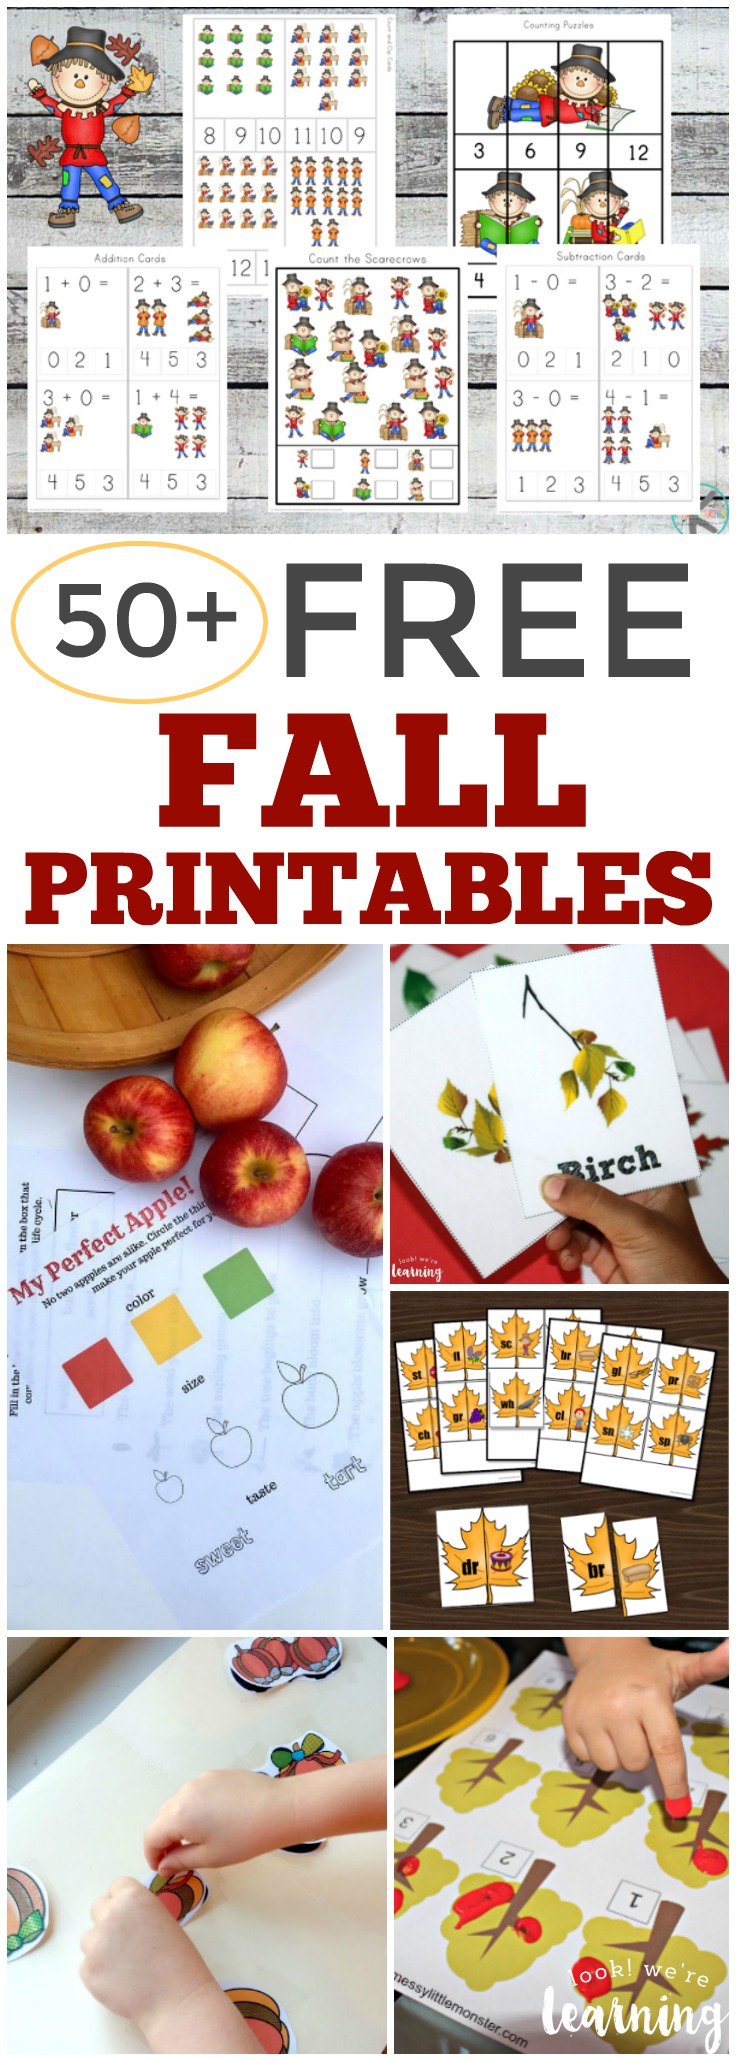 Over 50 Free Fall Printables for Kids!